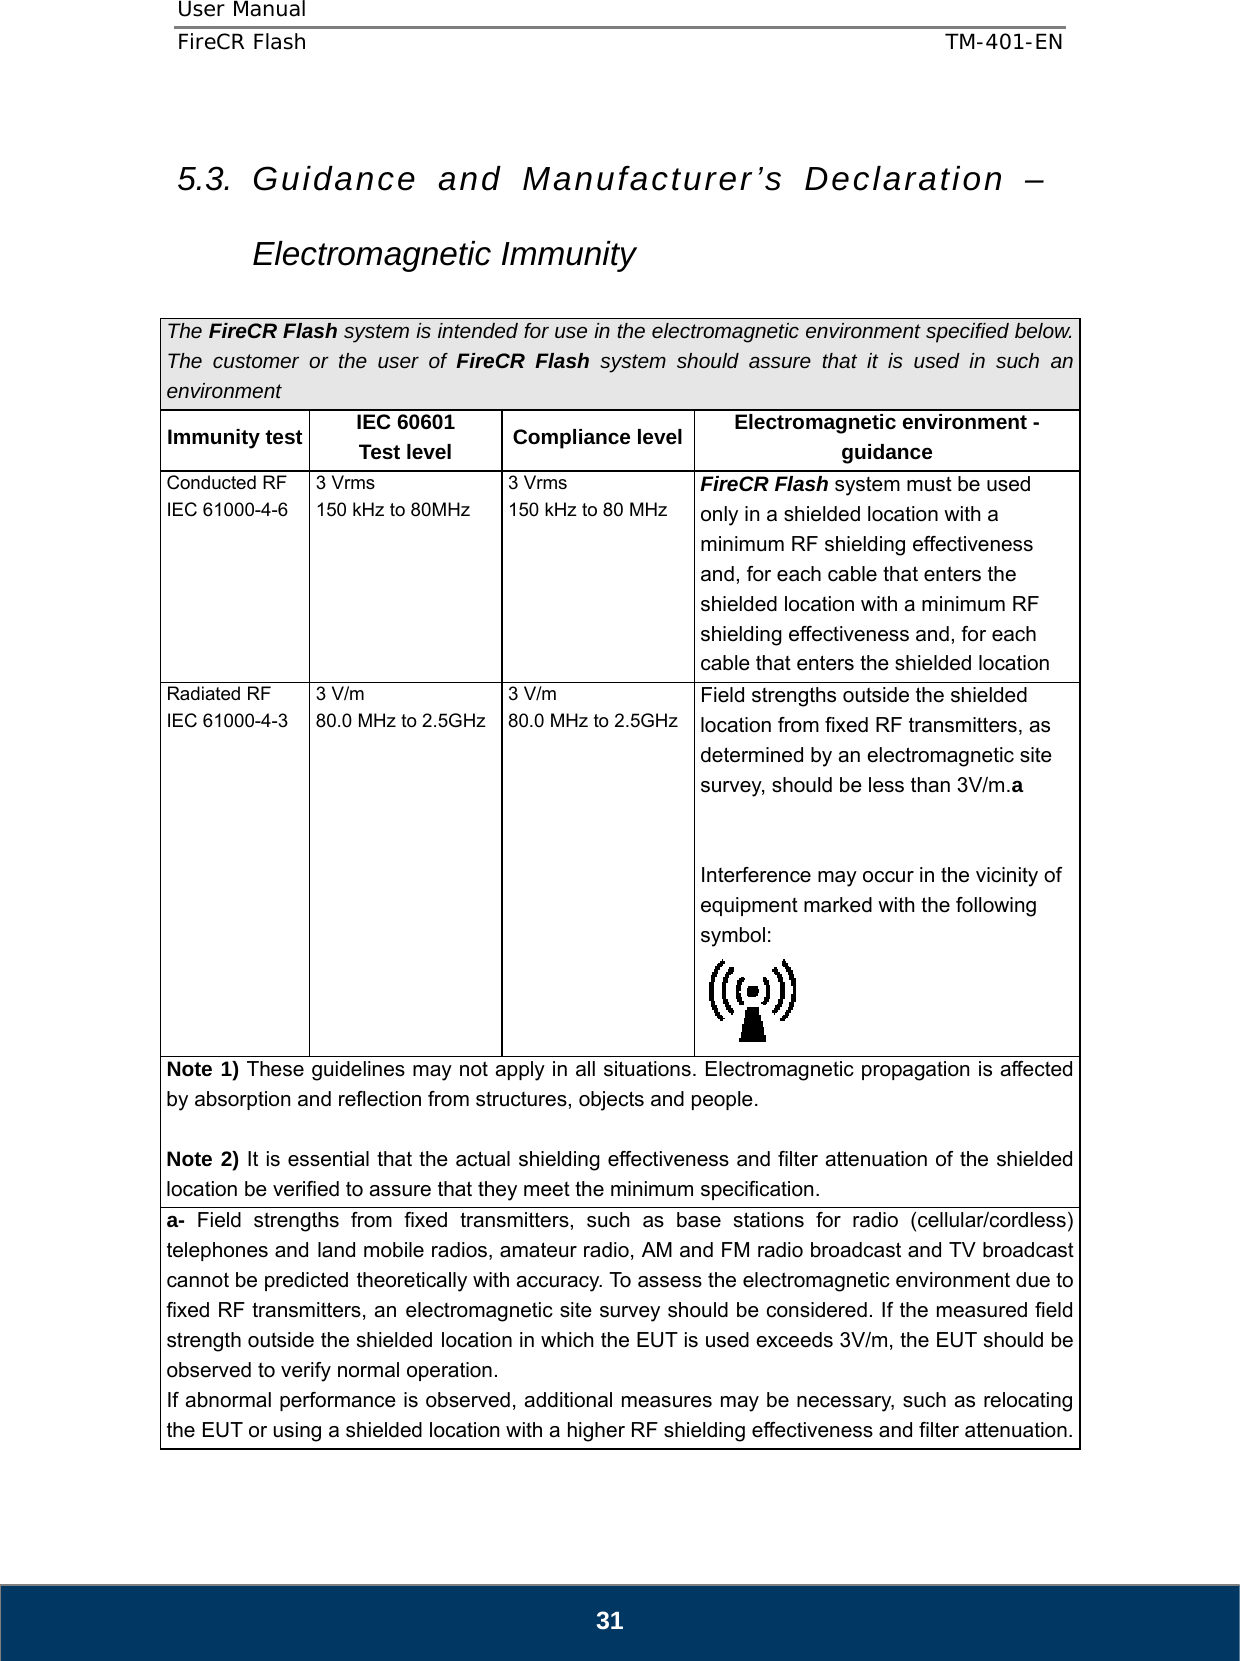 User Manual  FireCR Flash    TM-401-EN   31  5.3. Guidance and Manufacturer’s Declaration – Electromagnetic Immunity    The FireCR Flash system is intended for use in the electromagnetic environment specified below. The customer or the user of FireCR Flash system should assure that it is used in such an environment Immunity test IEC 60601 Test level Compliance level Electromagnetic environment -guidance Conducted RF IEC 61000-4-6 3 Vrms 150 kHz to 80MHz 3 Vrms 150 kHz to 80 MHz FireCR Flash system must be used only in a shielded location with a minimum RF shielding effectiveness and, for each cable that enters the shielded location with a minimum RF shielding effectiveness and, for each cable that enters the shielded location Radiated RF IEC 61000-4-3  3 V/m 80.0 MHz to 2.5GHz 3 V/m 80.0 MHz to 2.5GHzField strengths outside the shielded location from fixed RF transmitters, as determined by an electromagnetic site survey, should be less than 3V/m.a   Interference may occur in the vicinity of equipment marked with the following symbol:  Note 1) These guidelines may not apply in all situations. Electromagnetic propagation is affected by absorption and reflection from structures, objects and people.  Note 2) It is essential that the actual shielding effectiveness and filter attenuation of the shielded location be verified to assure that they meet the minimum specification. a- Field strengths from fixed transmitters, such as base stations for radio (cellular/cordless) telephones and land mobile radios, amateur radio, AM and FM radio broadcast and TV broadcast cannot be predicted theoretically with accuracy. To assess the electromagnetic environment due to fixed RF transmitters, an electromagnetic site survey should be considered. If the measured field strength outside the shielded location in which the EUT is used exceeds 3V/m, the EUT should be observed to verify normal operation. If abnormal performance is observed, additional measures may be necessary, such as relocating the EUT or using a shielded location with a higher RF shielding effectiveness and filter attenuation. 